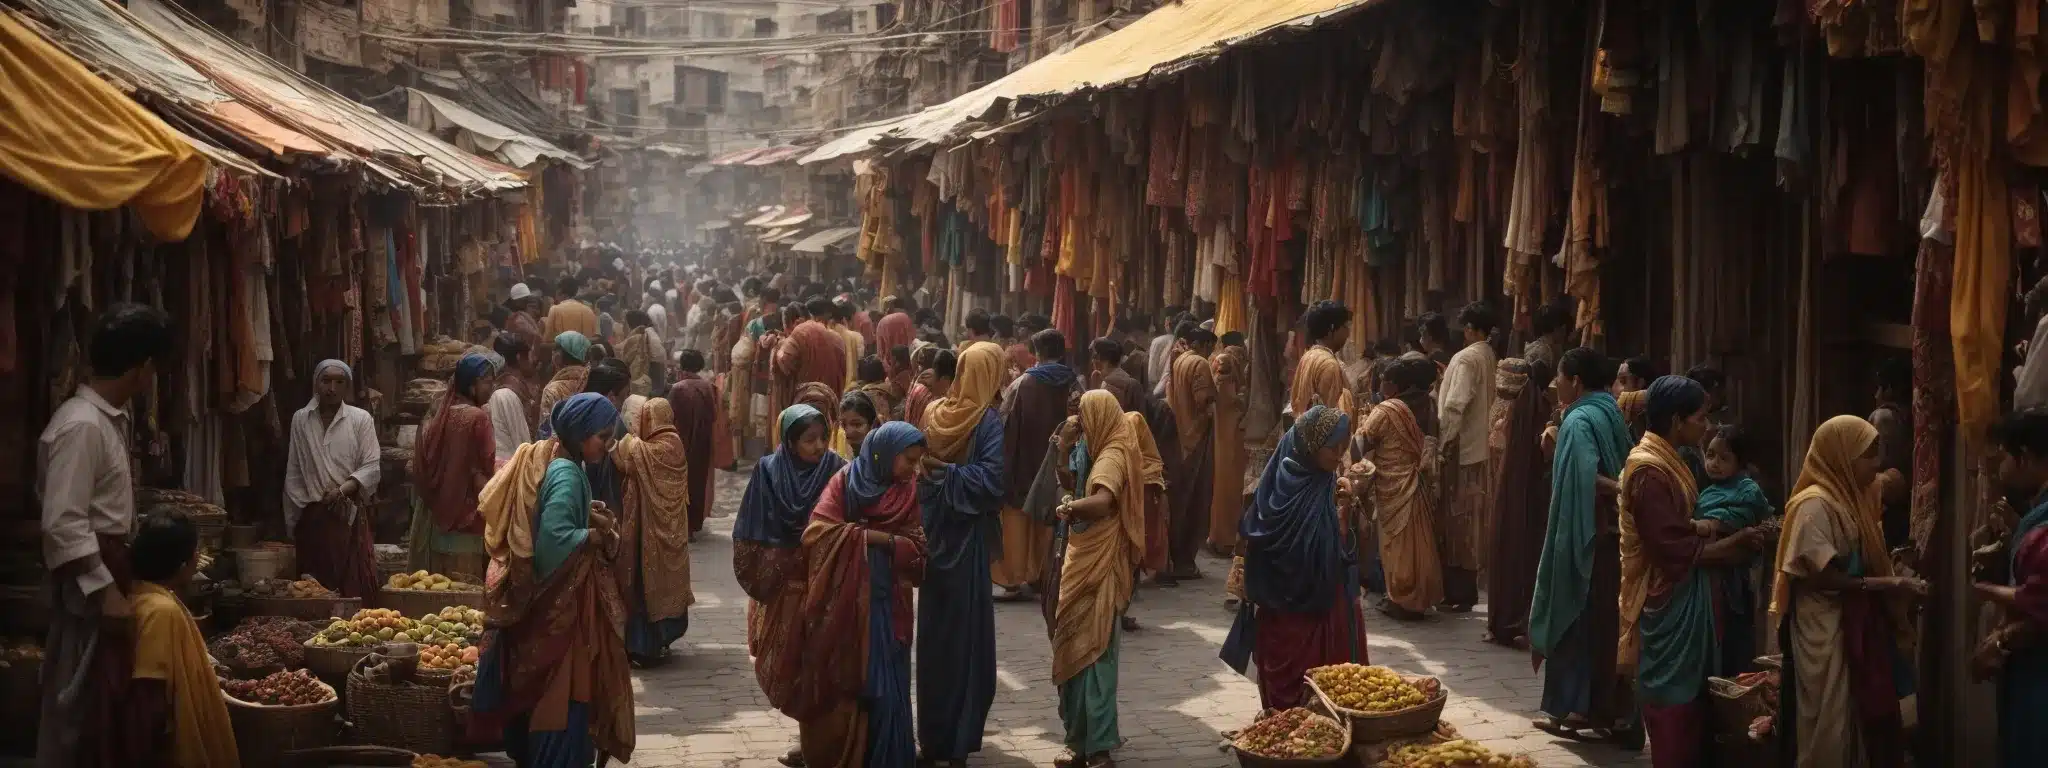 A Bustling Bazaar Vibrant With The Collective Hum Of People Engaging, Exchanging, And Connecting In The Dance Of Commerce.